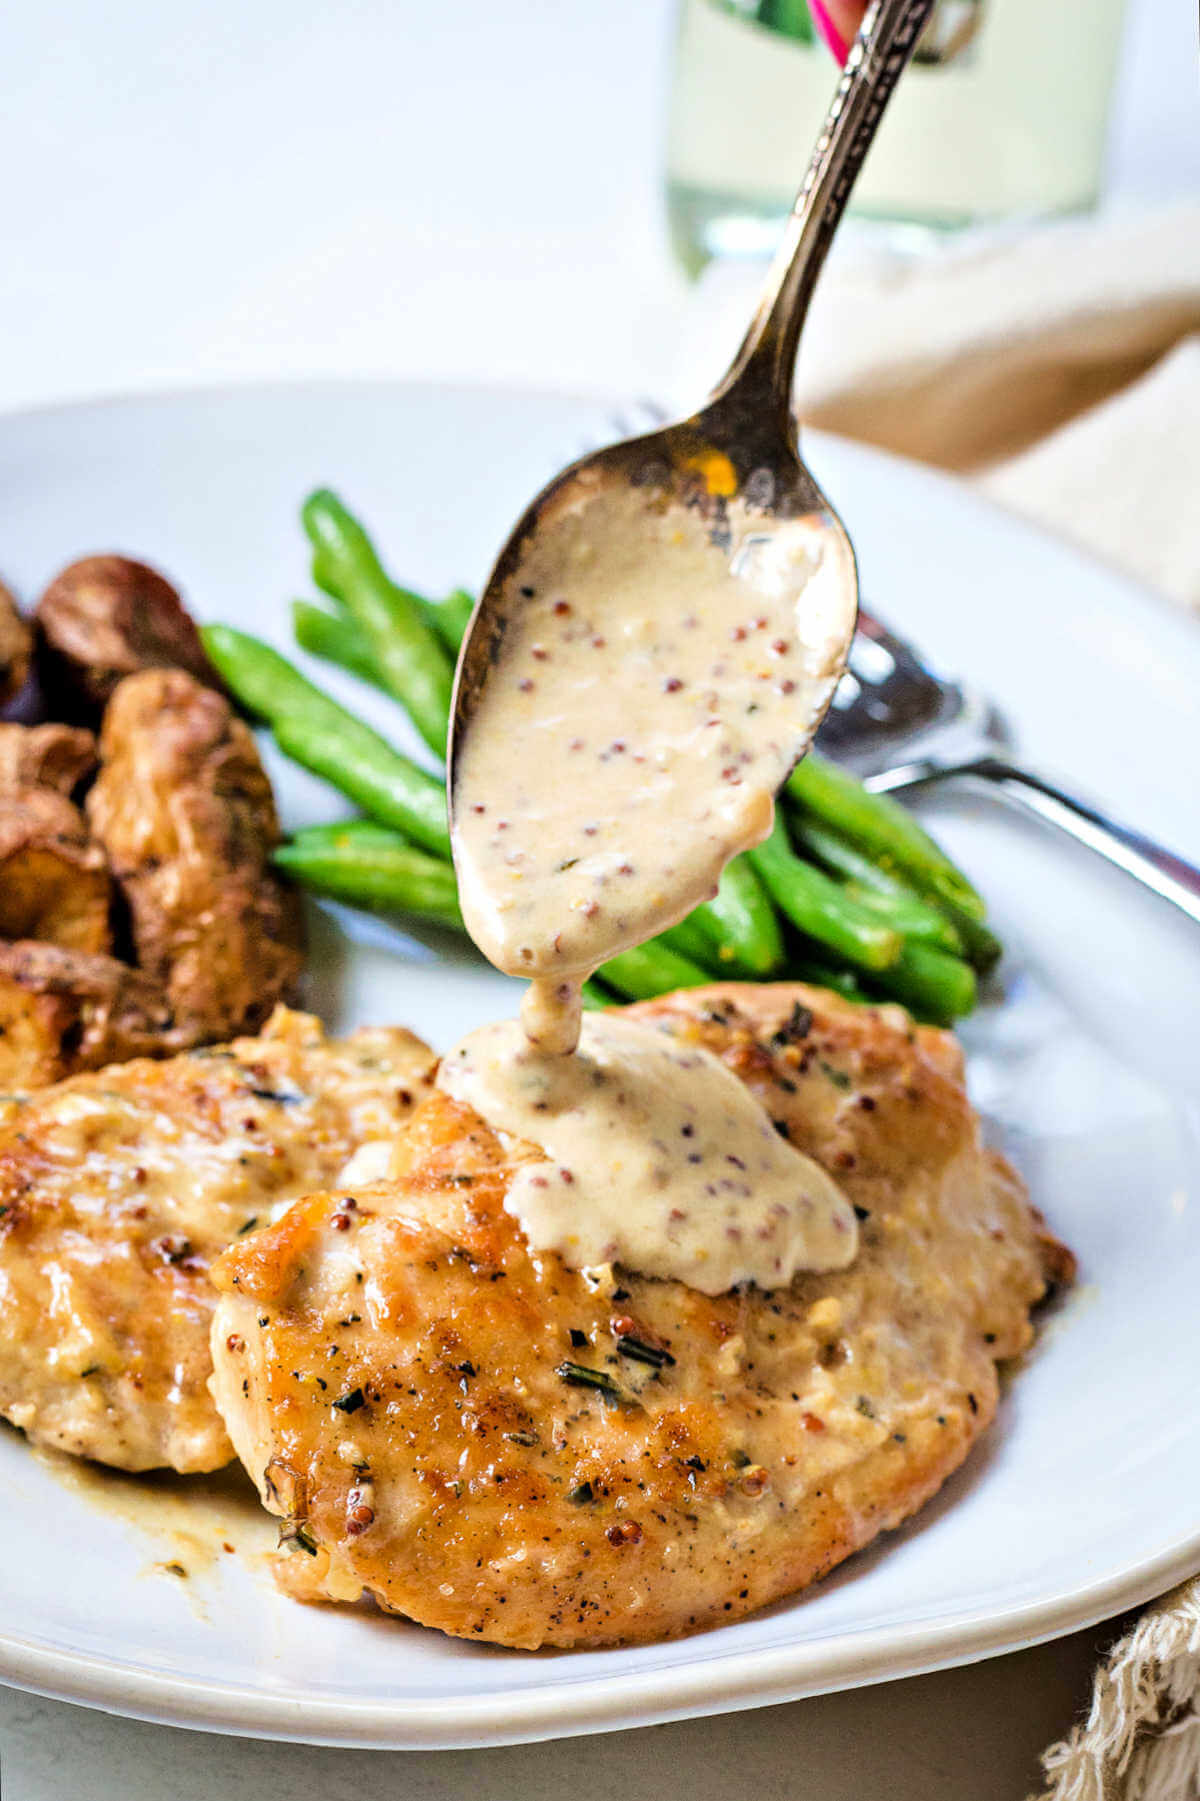 a spoon ladeling mustard sauce over chicken cutlets on a plate.